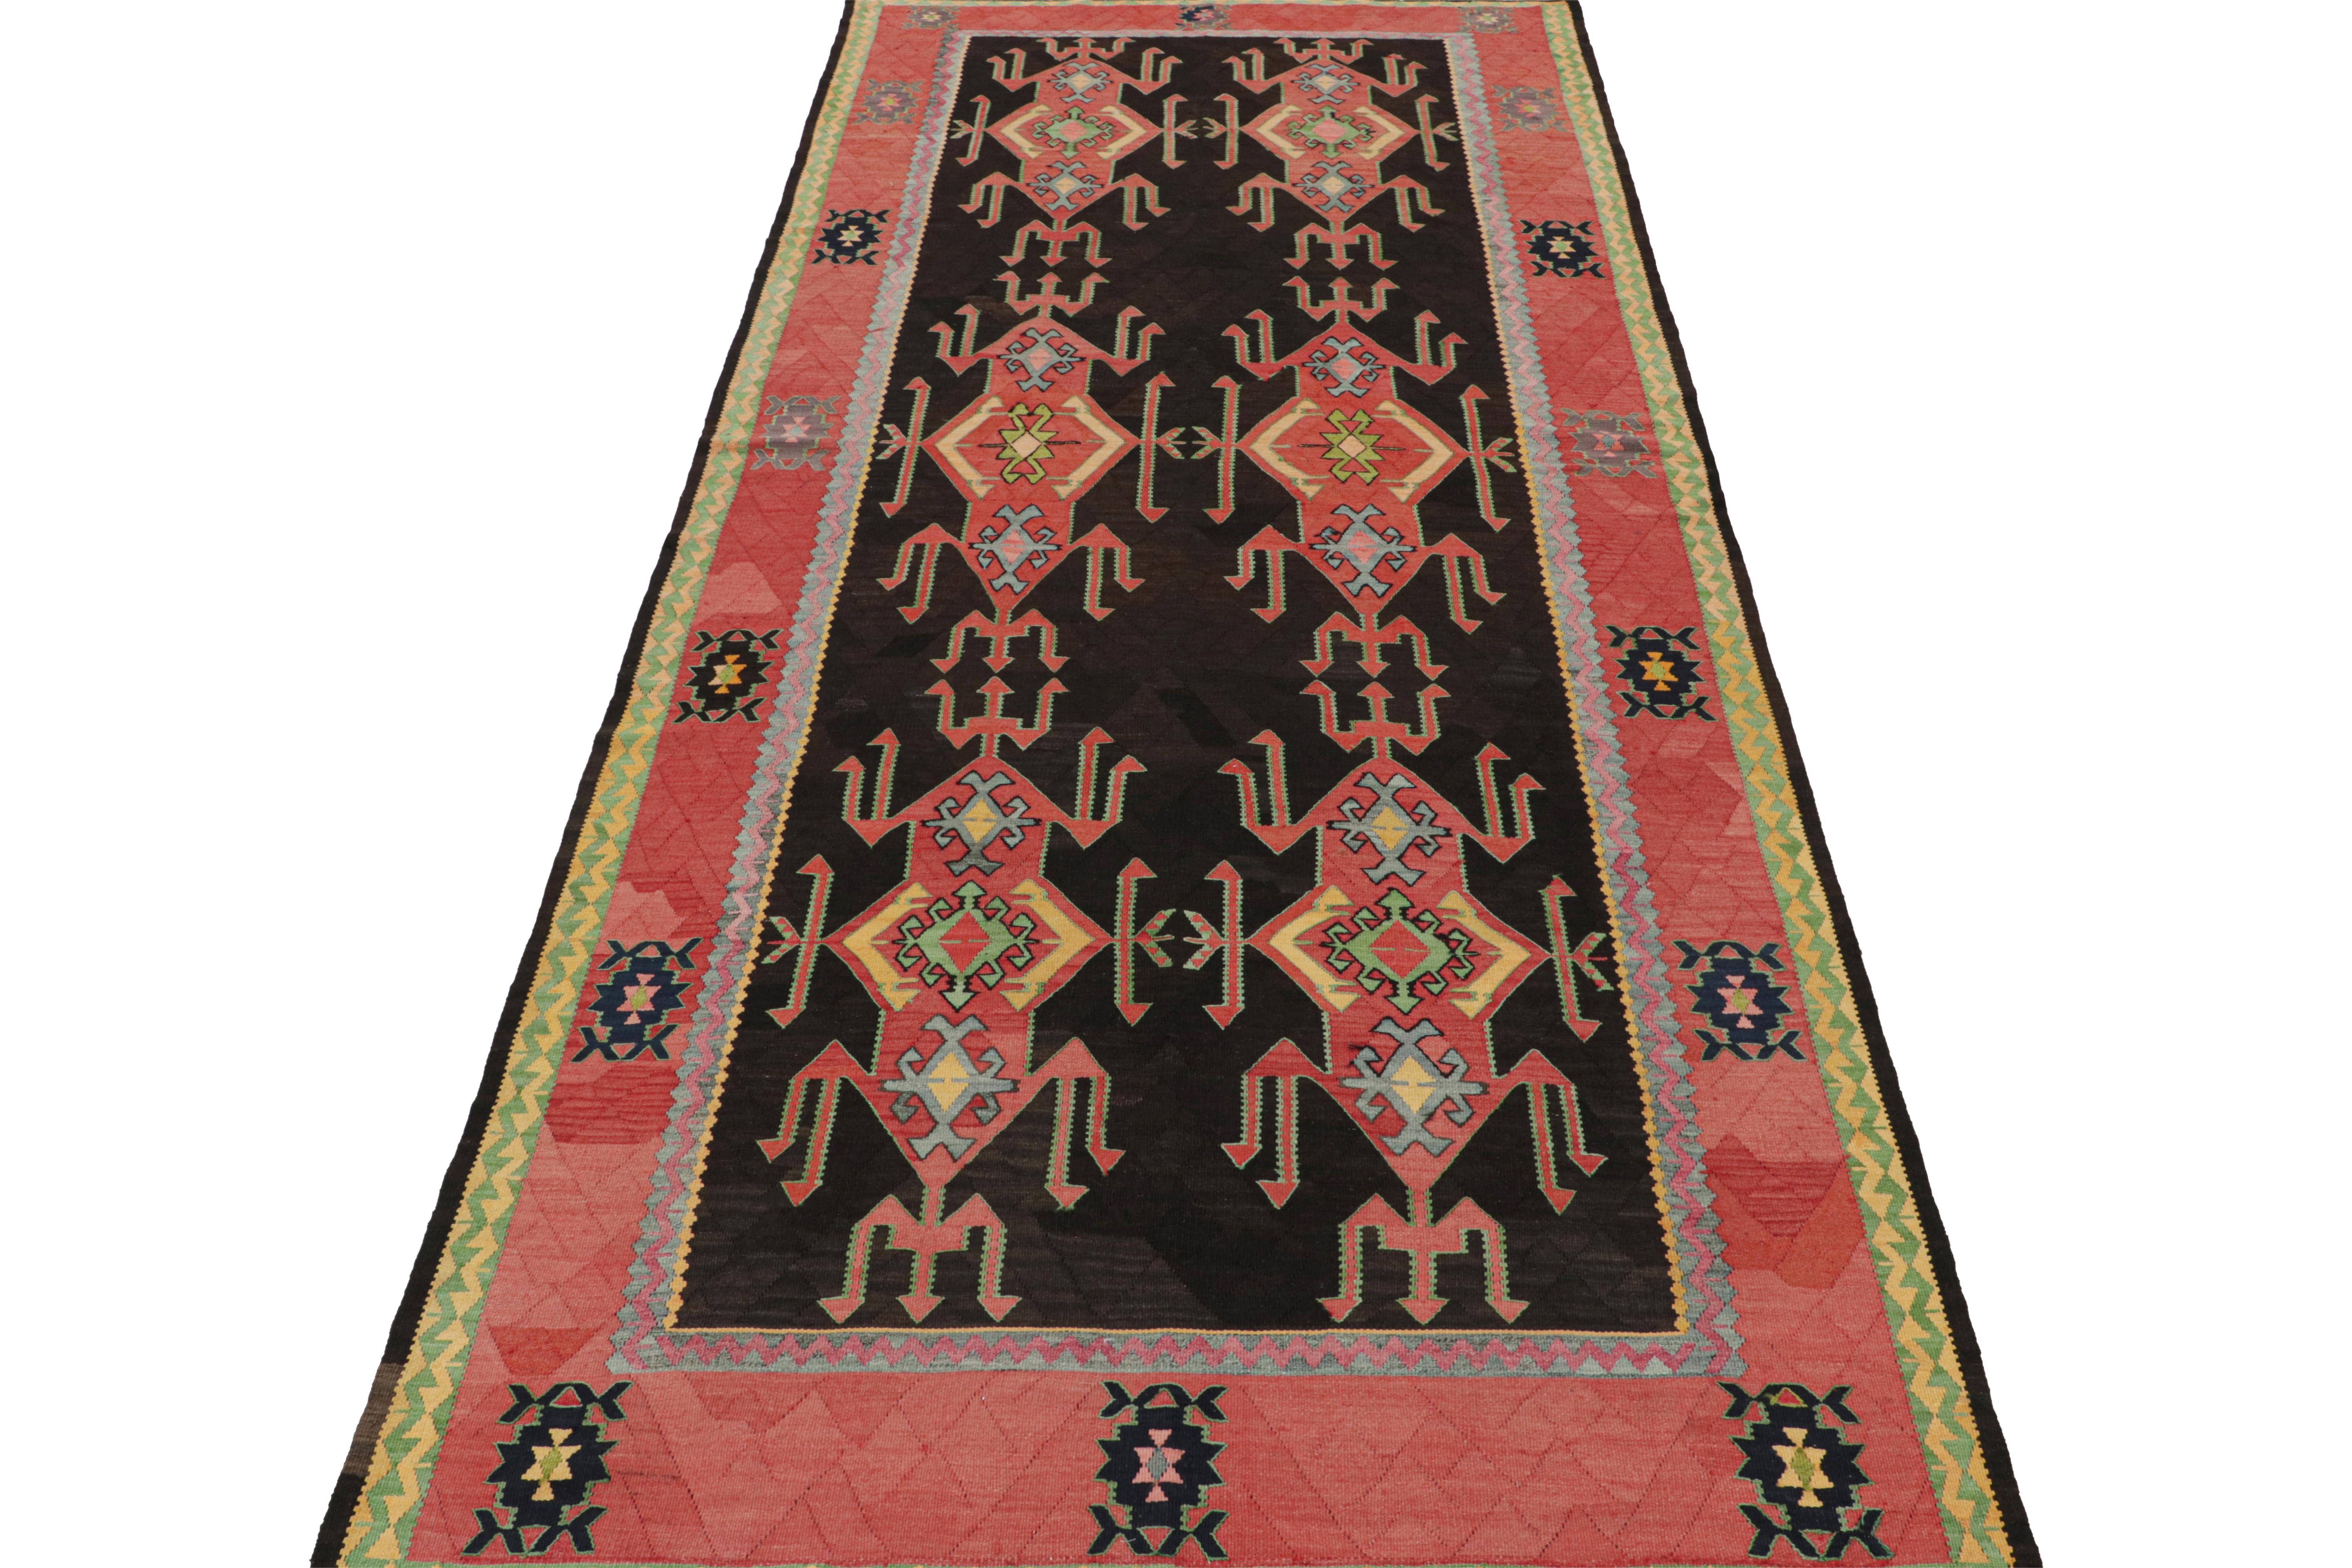 Tribal Vintage Persian Kilim with Red Patterns on a Black Field, from Rug & Kilim For Sale